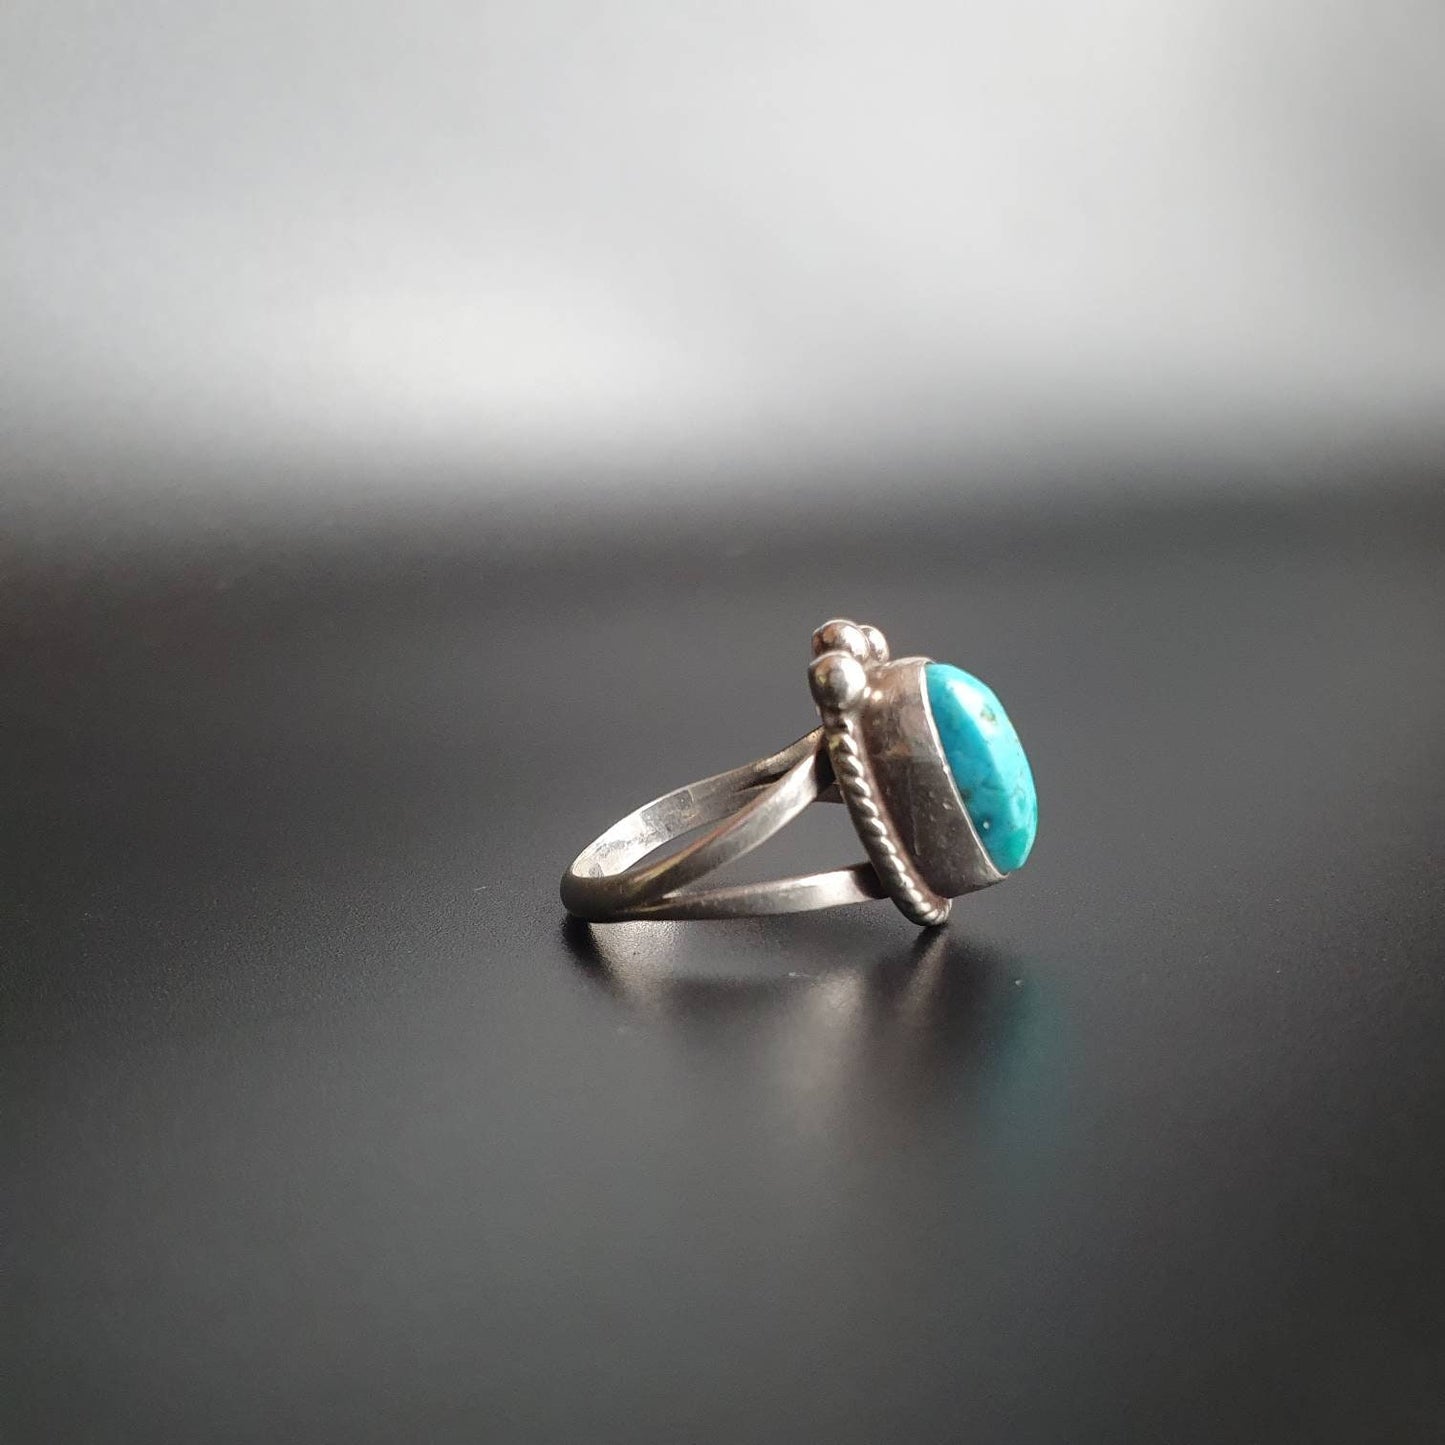 Silver ring, vintage ring  vintage turquoise, vintage jewellery, statement ring, dainty ring,statement jewellery, sterling silver, gifts